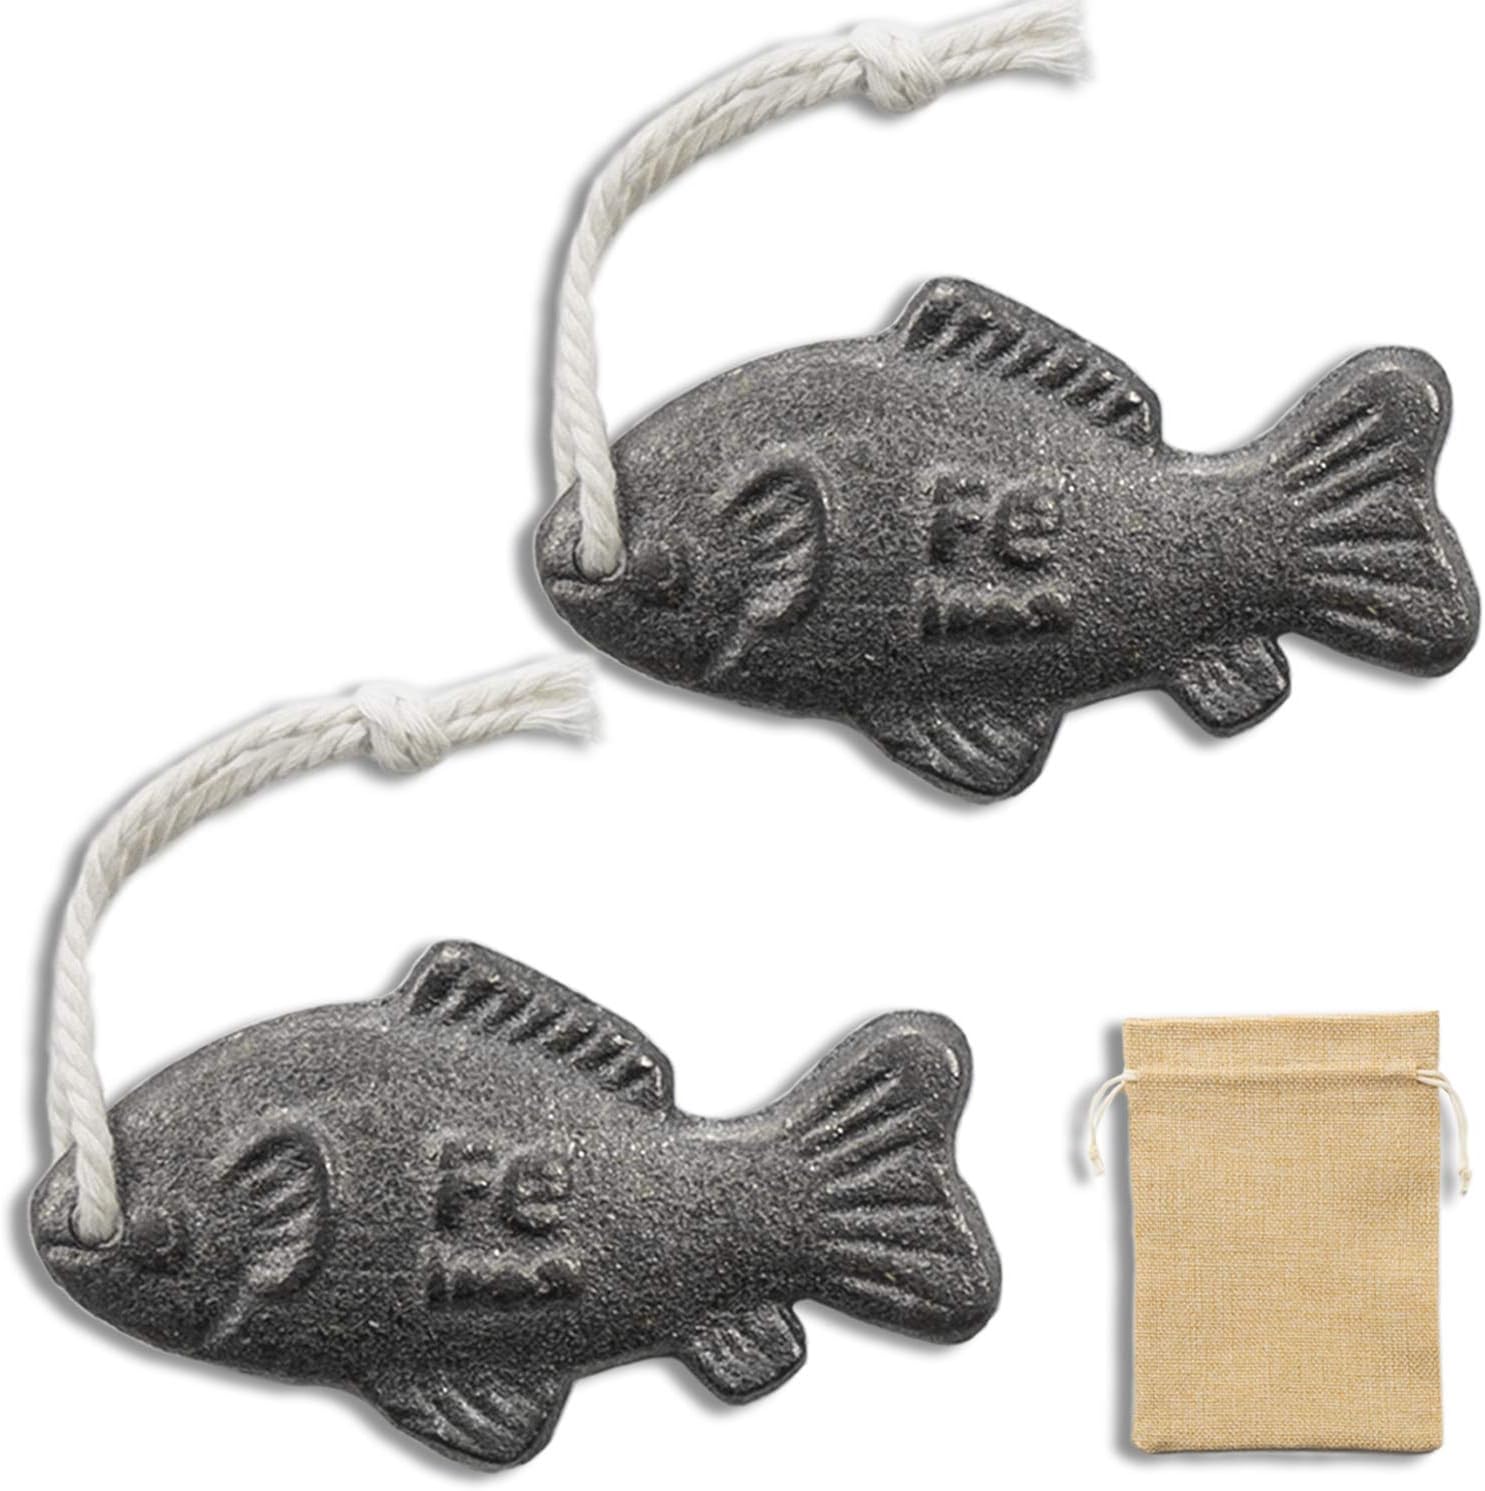 2 Packs of Iron Fish with Bag-A Natural Source of Iron to Reduce The Risk of Iron Deficiency,an Effective and Safe Cooking Tool to Add Iron to Food,Ideal for Pregnant Women Vegans Athletes